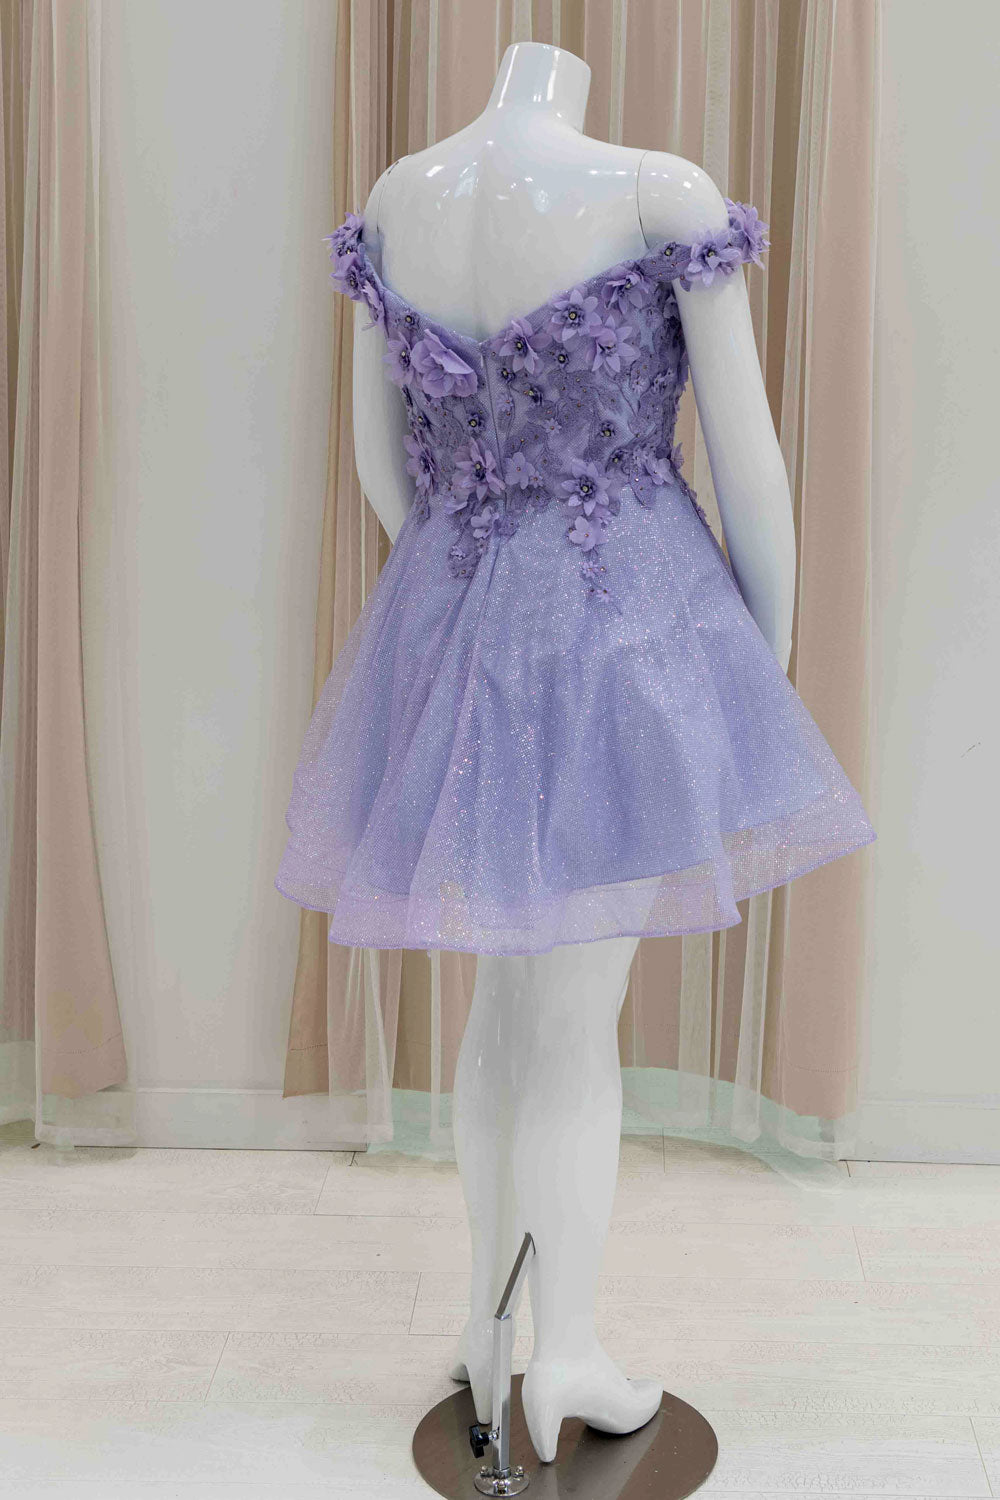 Short Fit and Flare Dress in Purple for a Dance